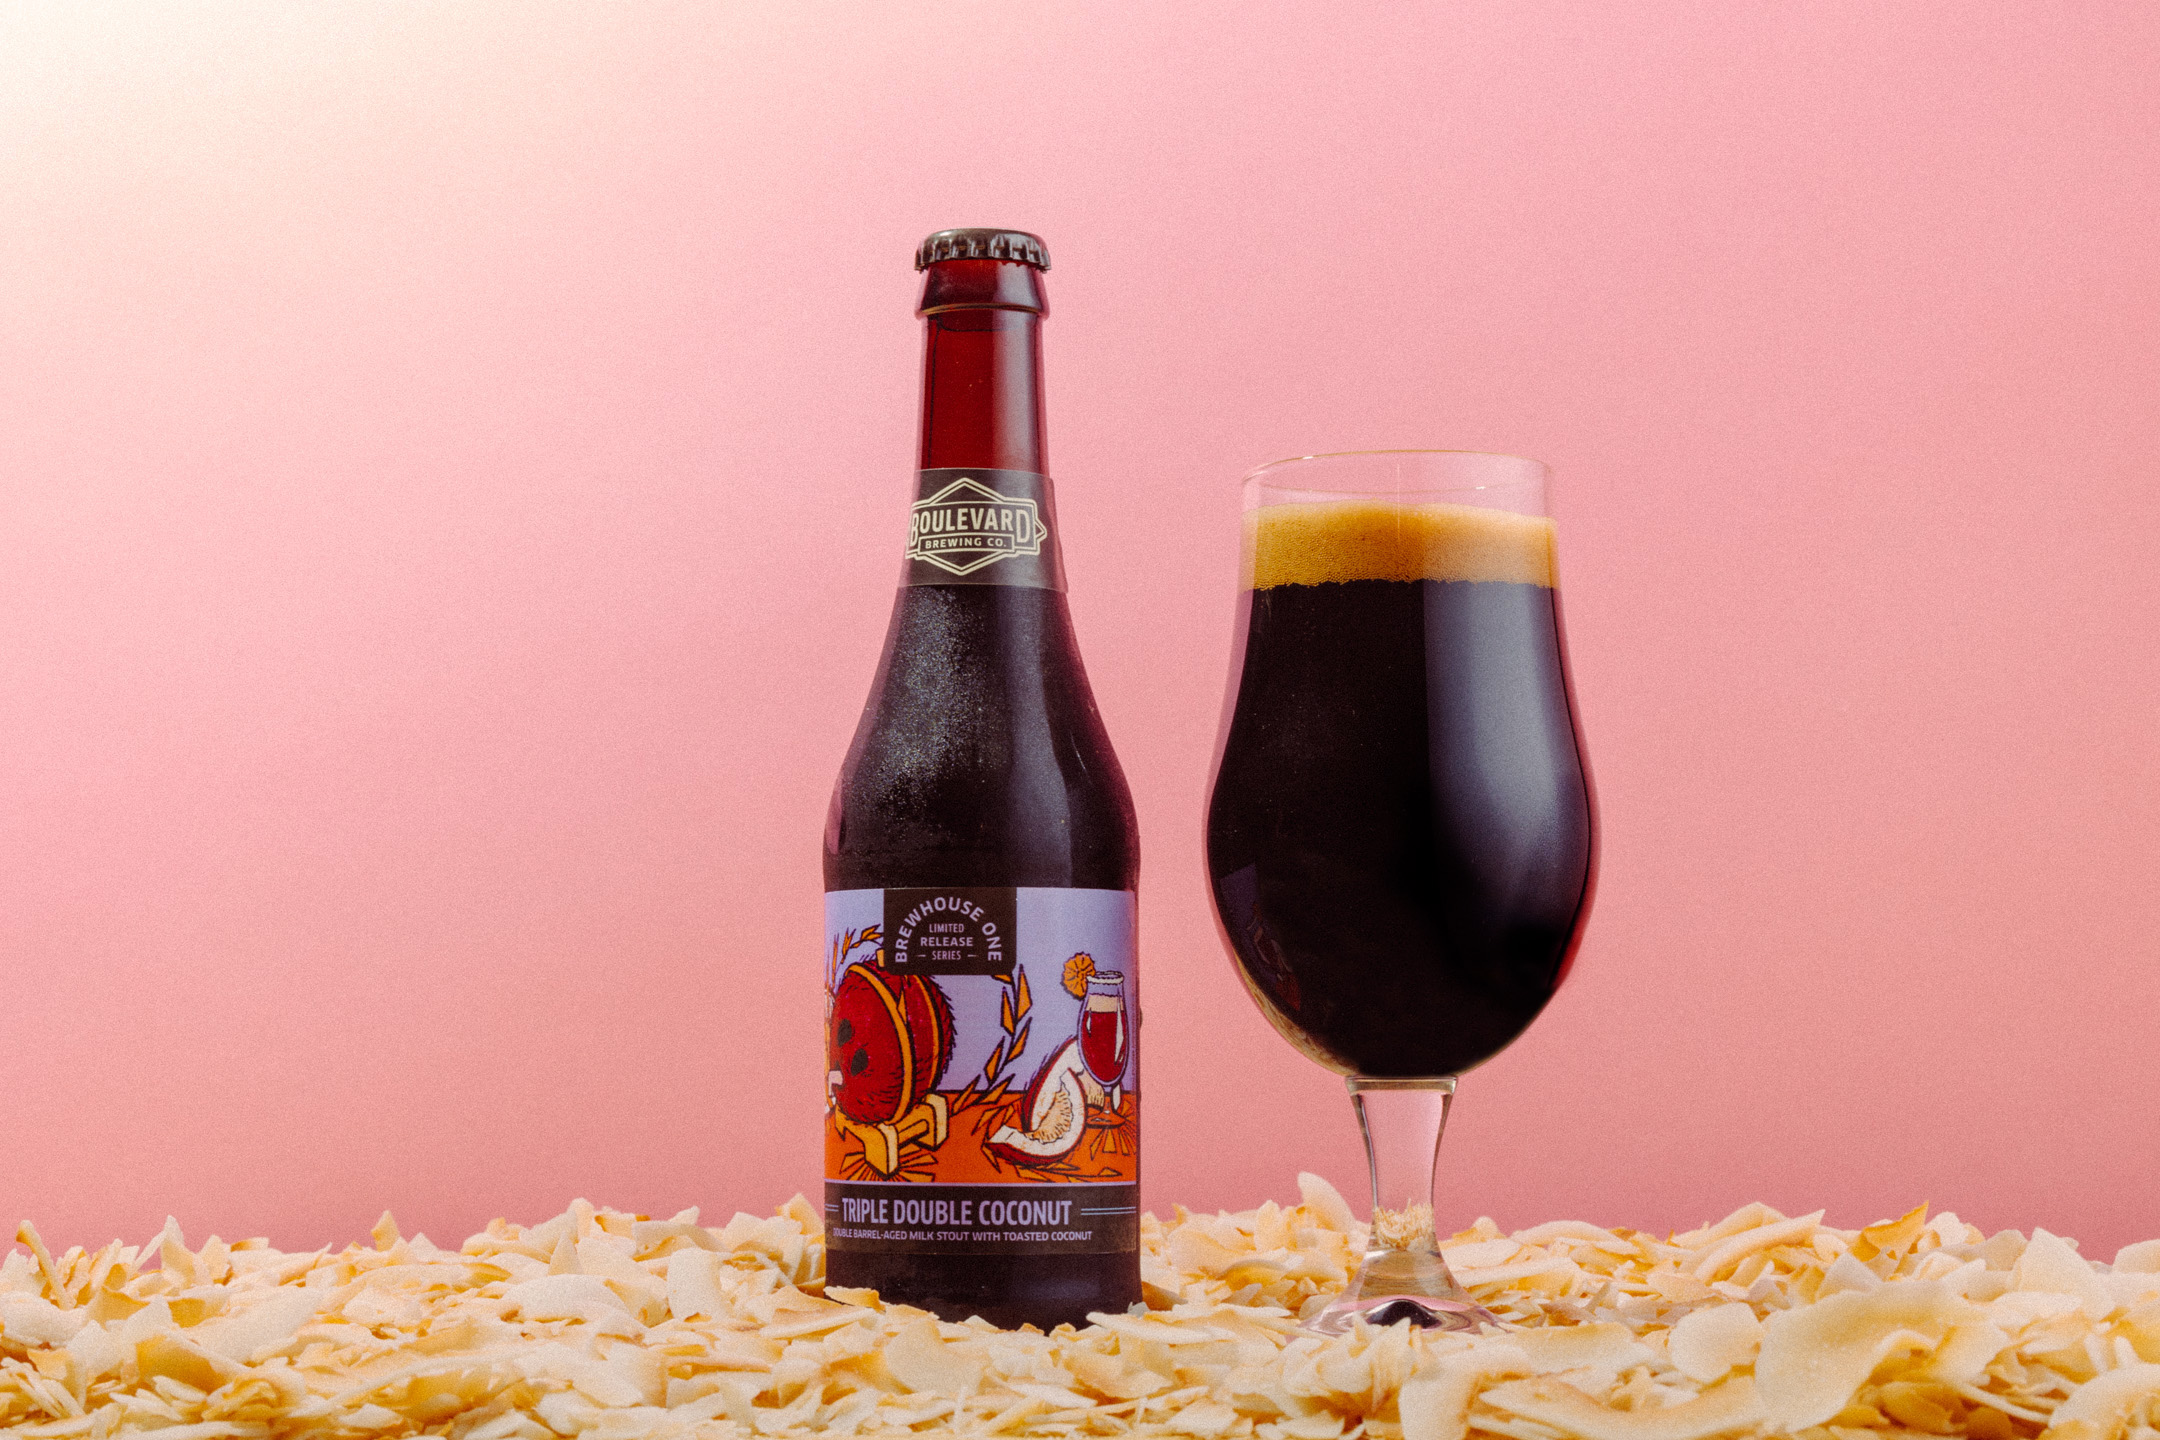 Brewhouse One – Triple Double Coconut, Double Barrel-Aged Milk Stout with Toasted Coconut